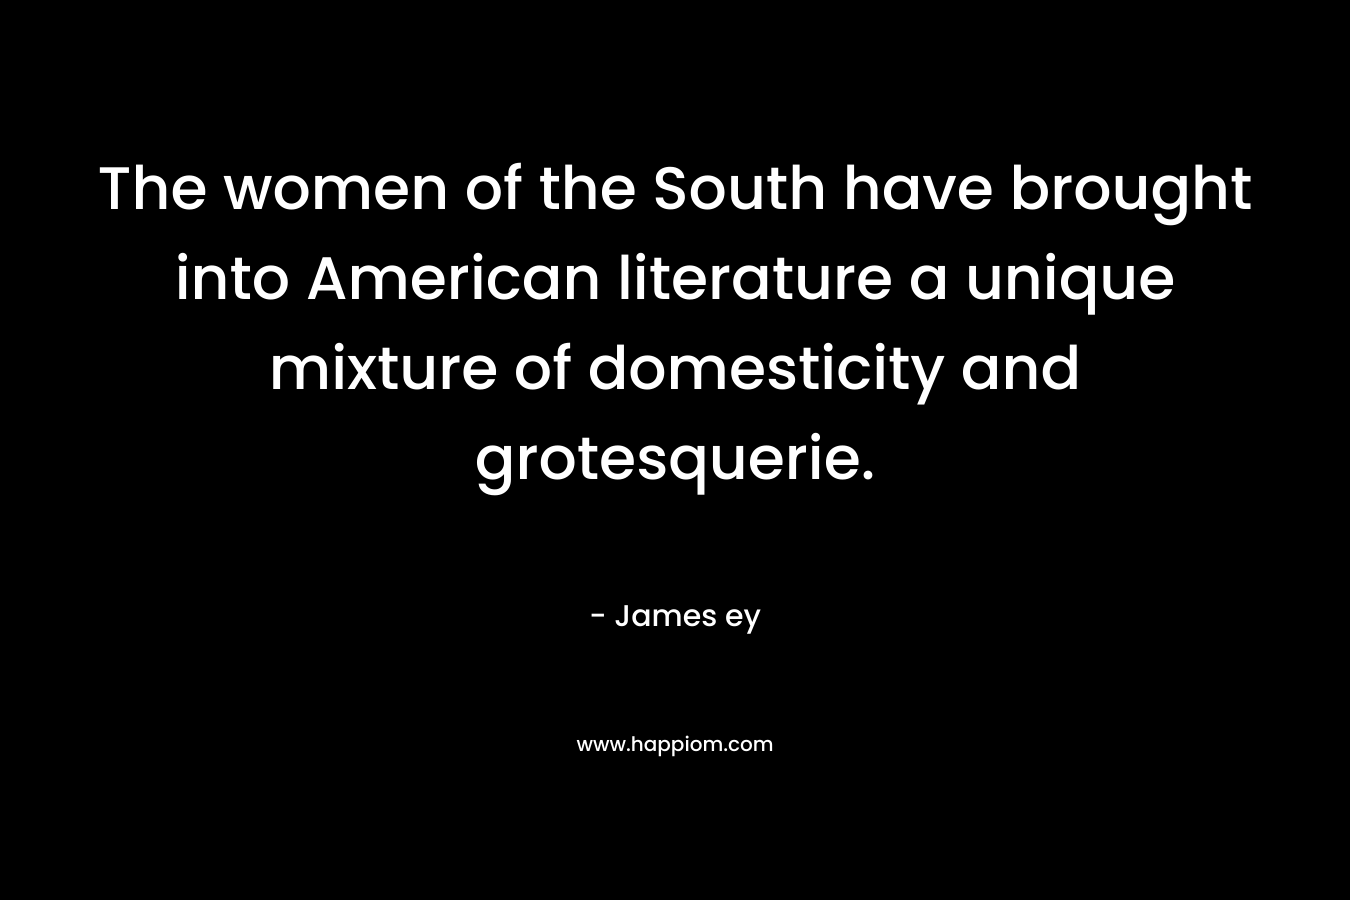 The women of the South have brought into American literature a unique mixture of domesticity and grotesquerie.